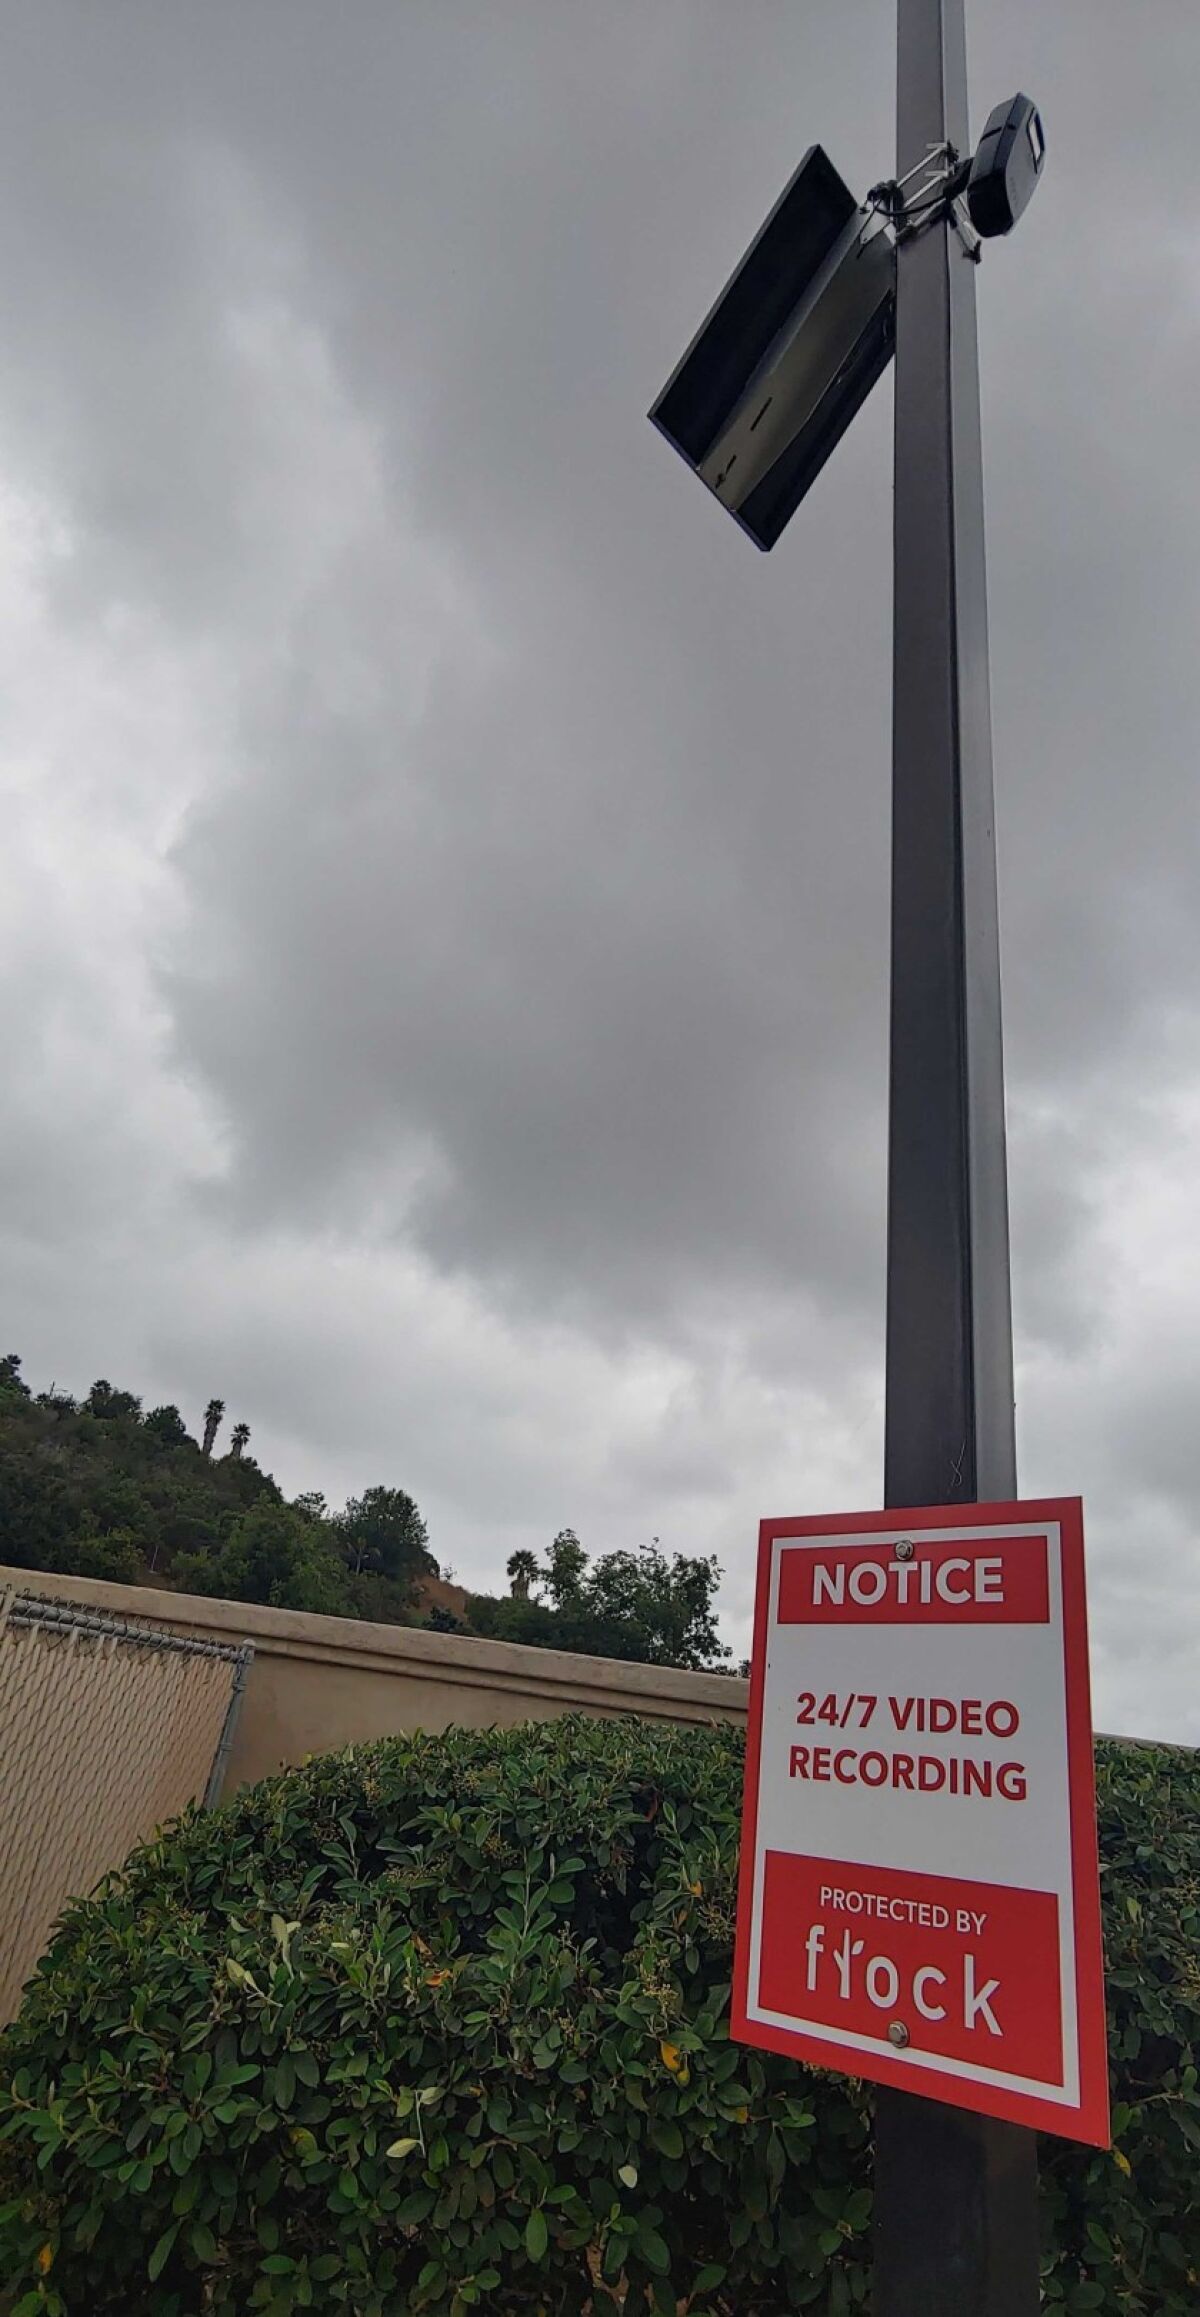 The La Cañada City Council has OK'd using Flock Safety license plate reader cameras, like ones recently installed in Escondido, to catch criminals.